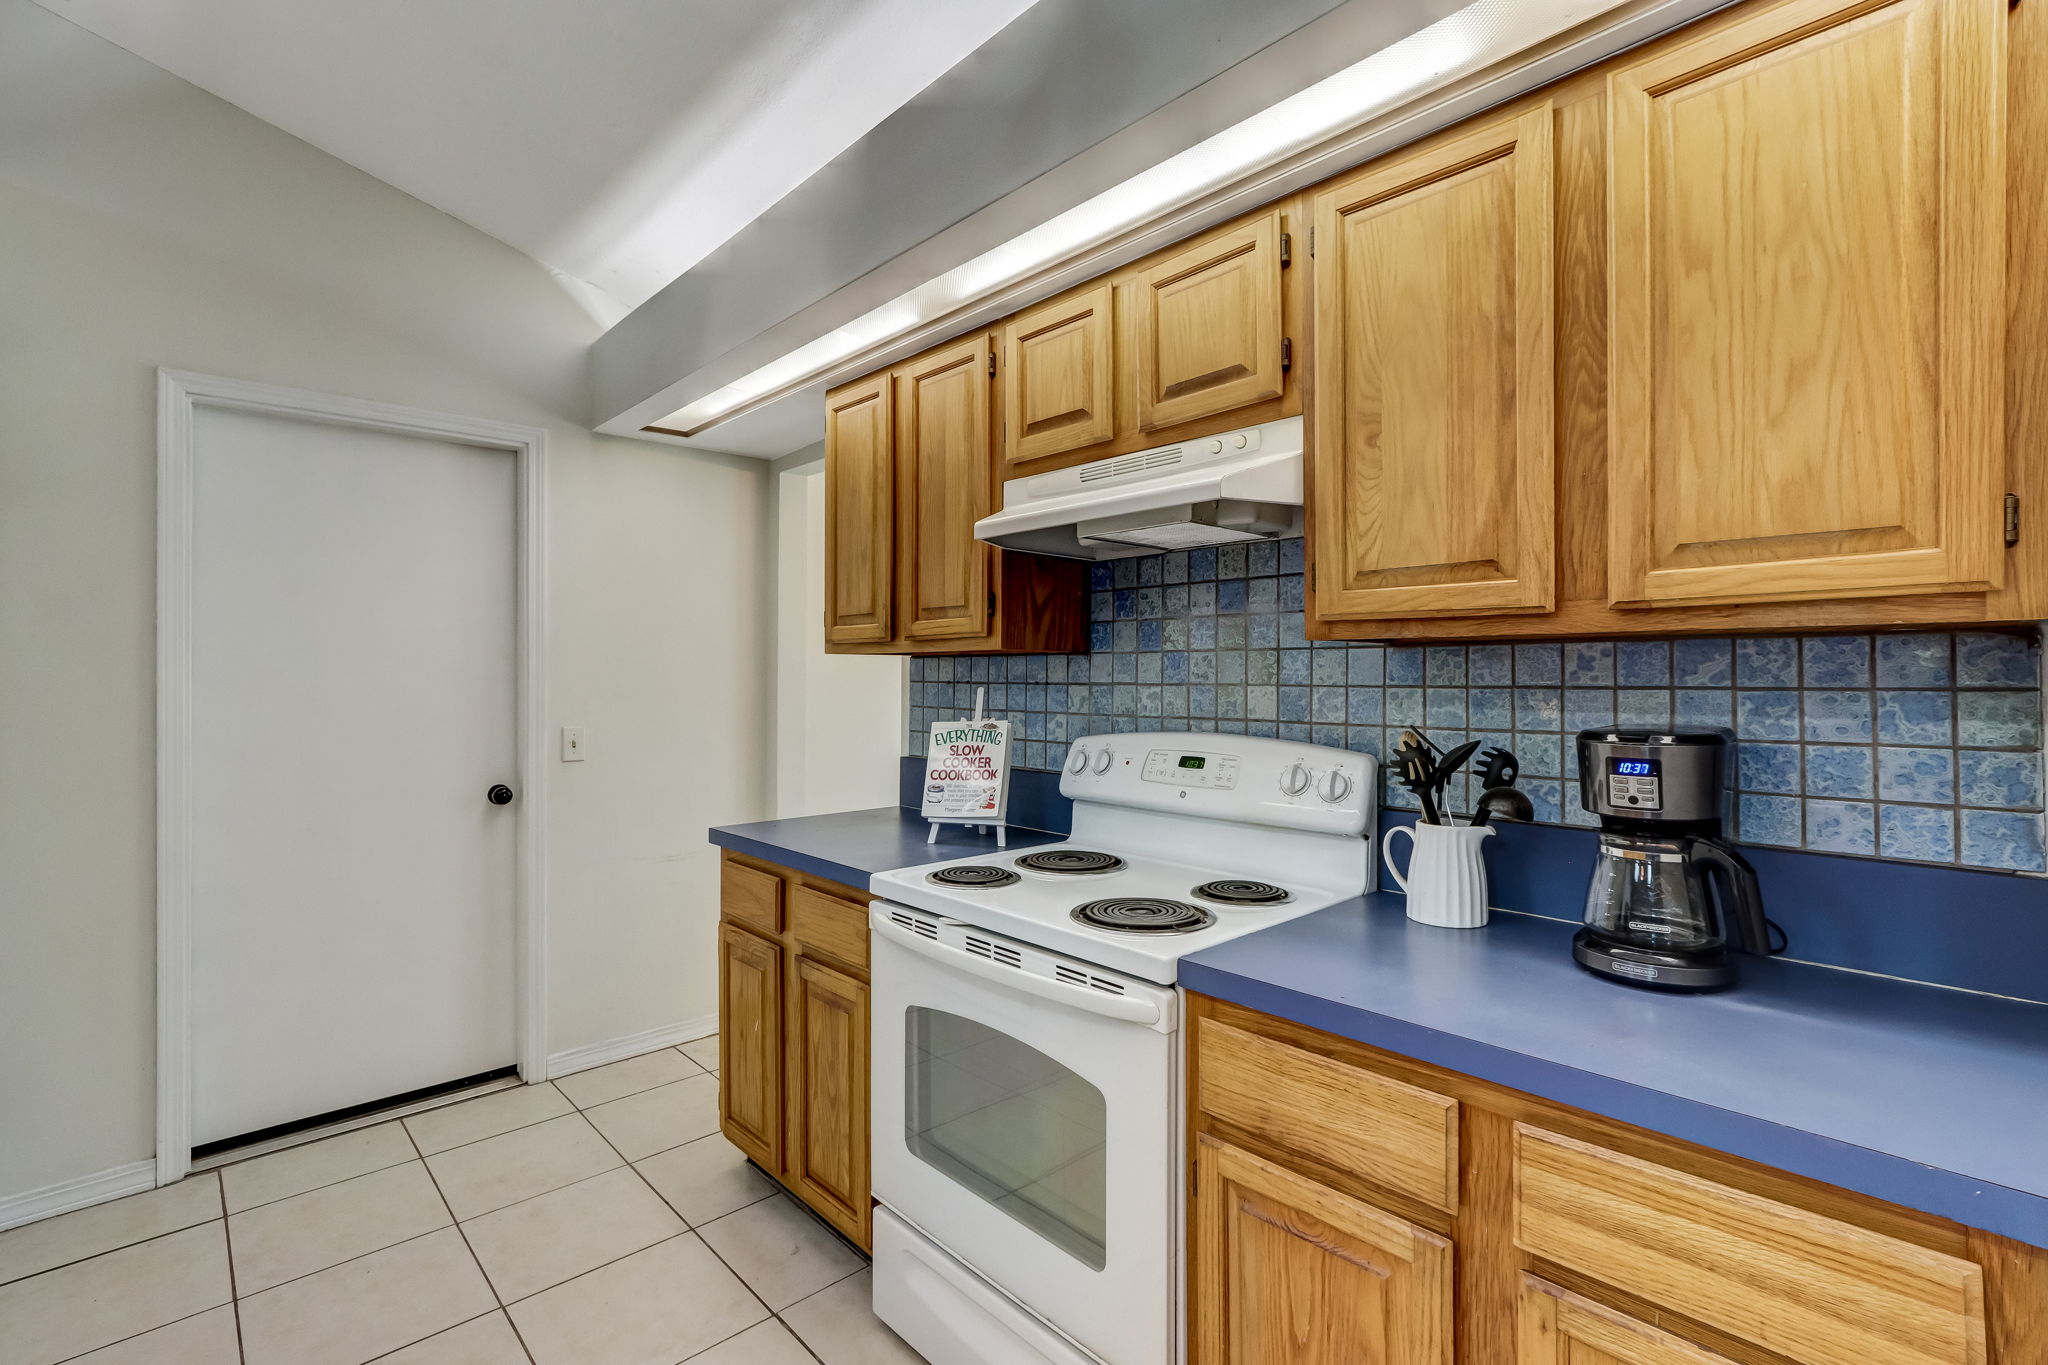 Kitchen is spacious with ample counter space and cabinetry